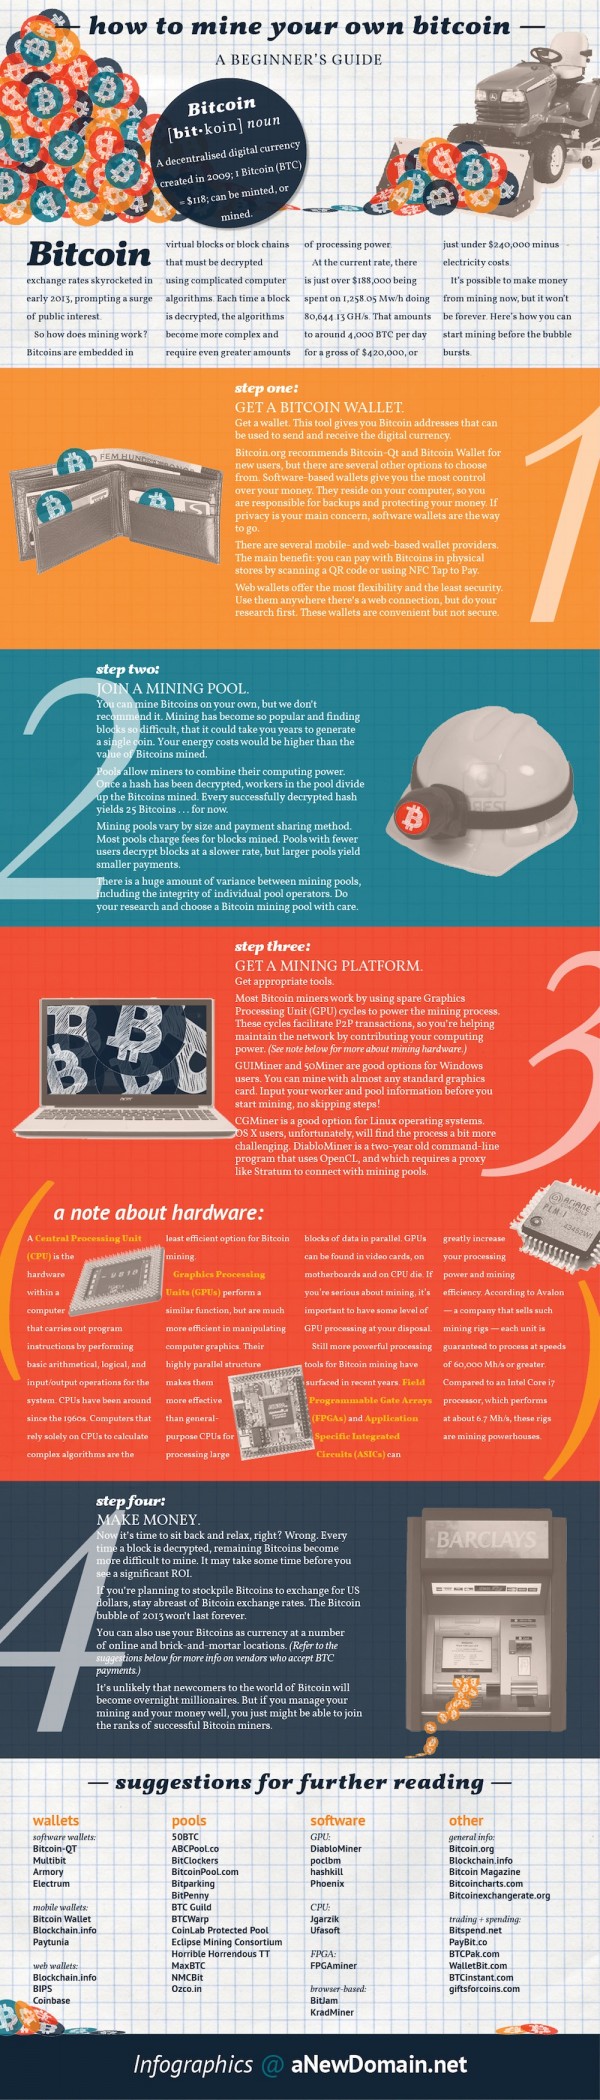 how_to_mine_your_own_bitcoin_infographic